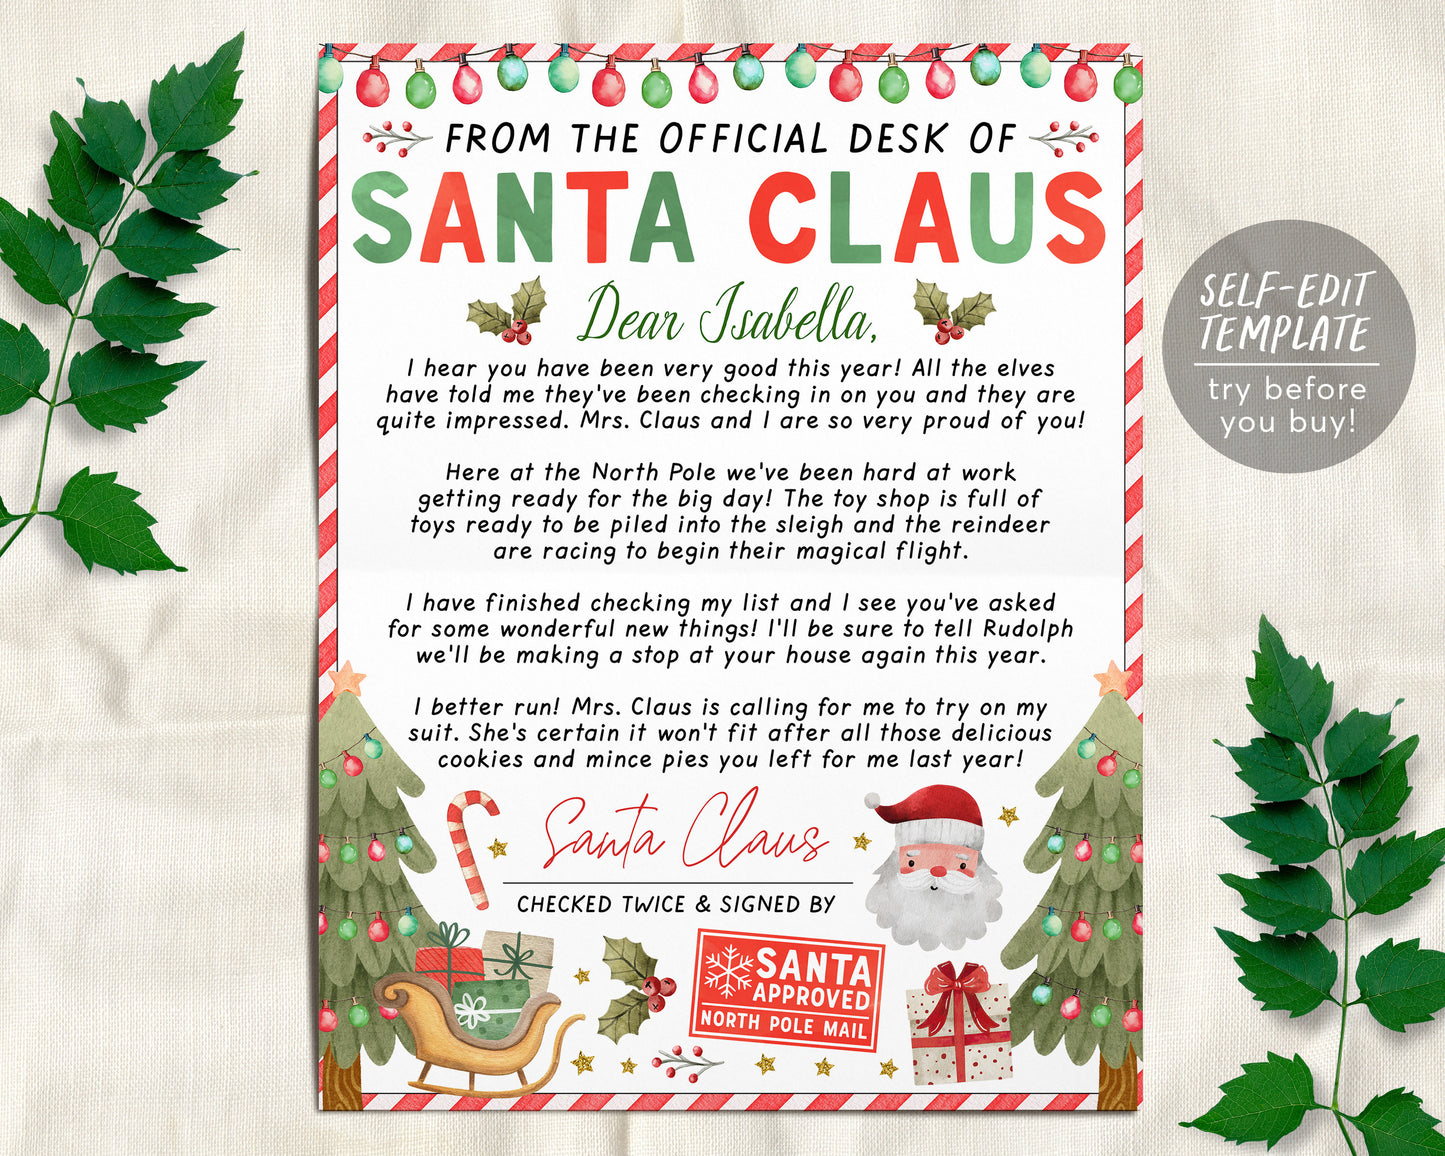 Santa Claus Letter Editable Template, Customized From The Official Des ...